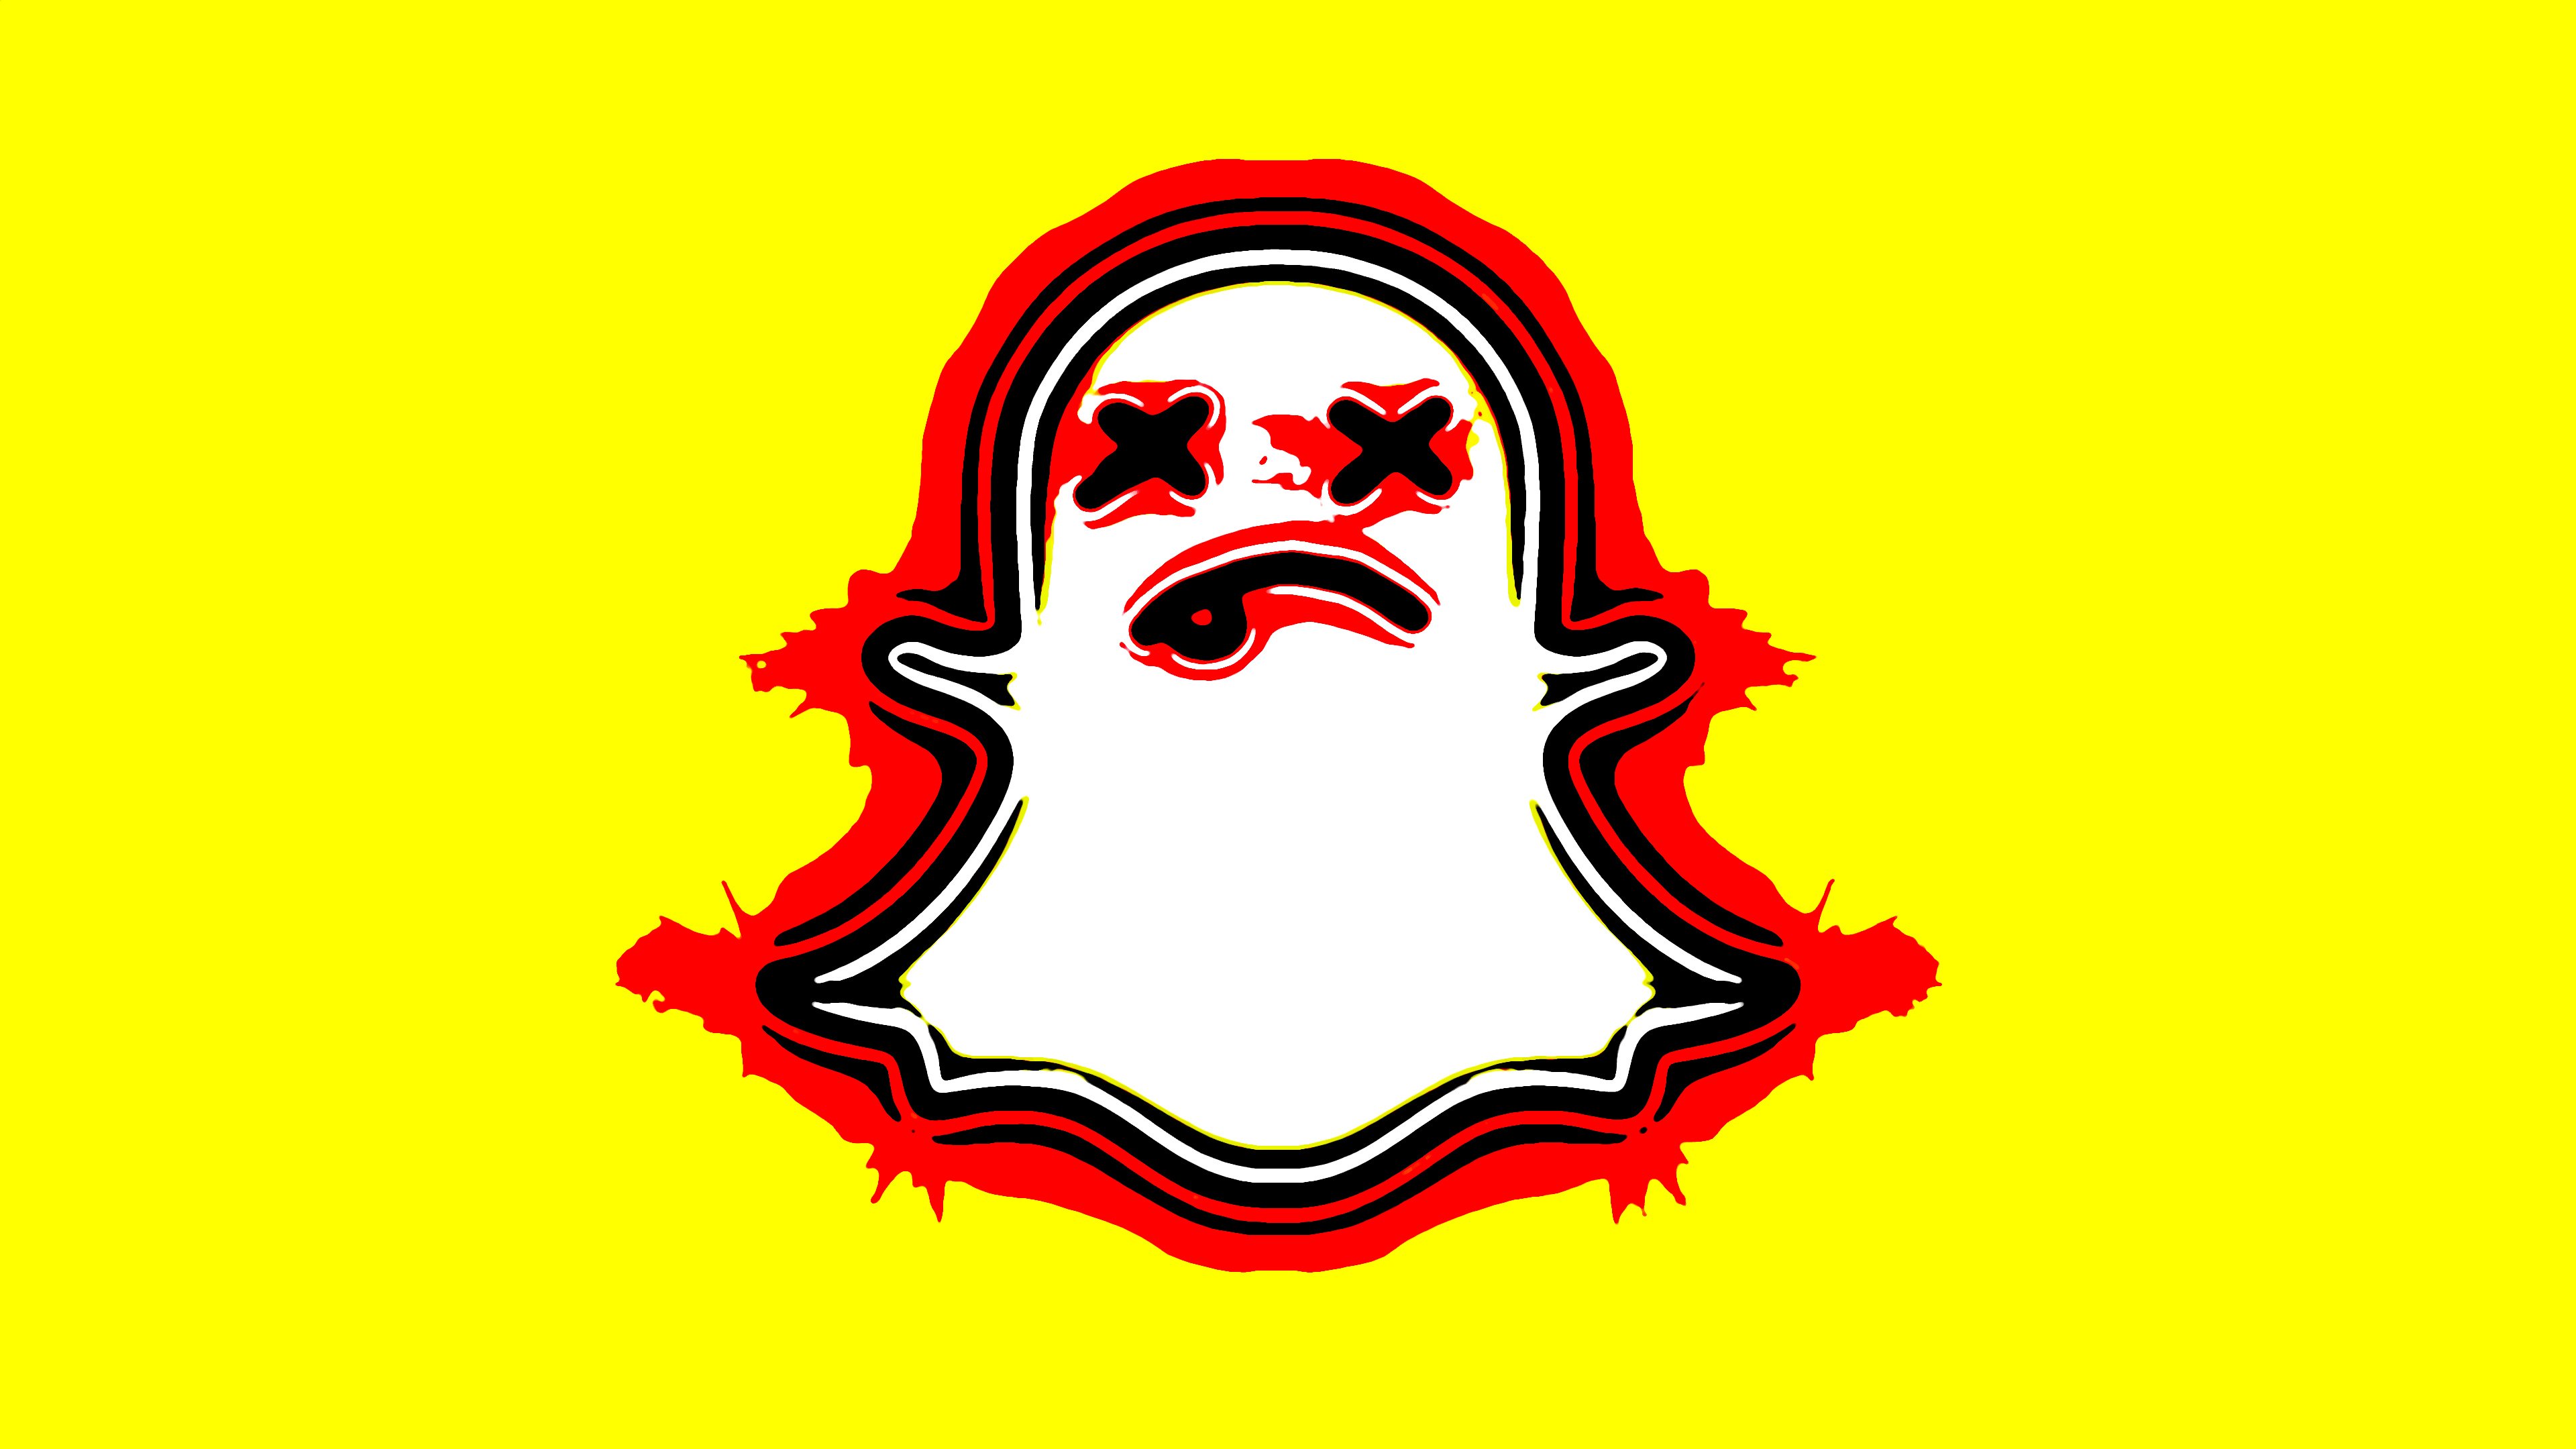 Snapchat launches ChatGPT integration - 9to5Mac